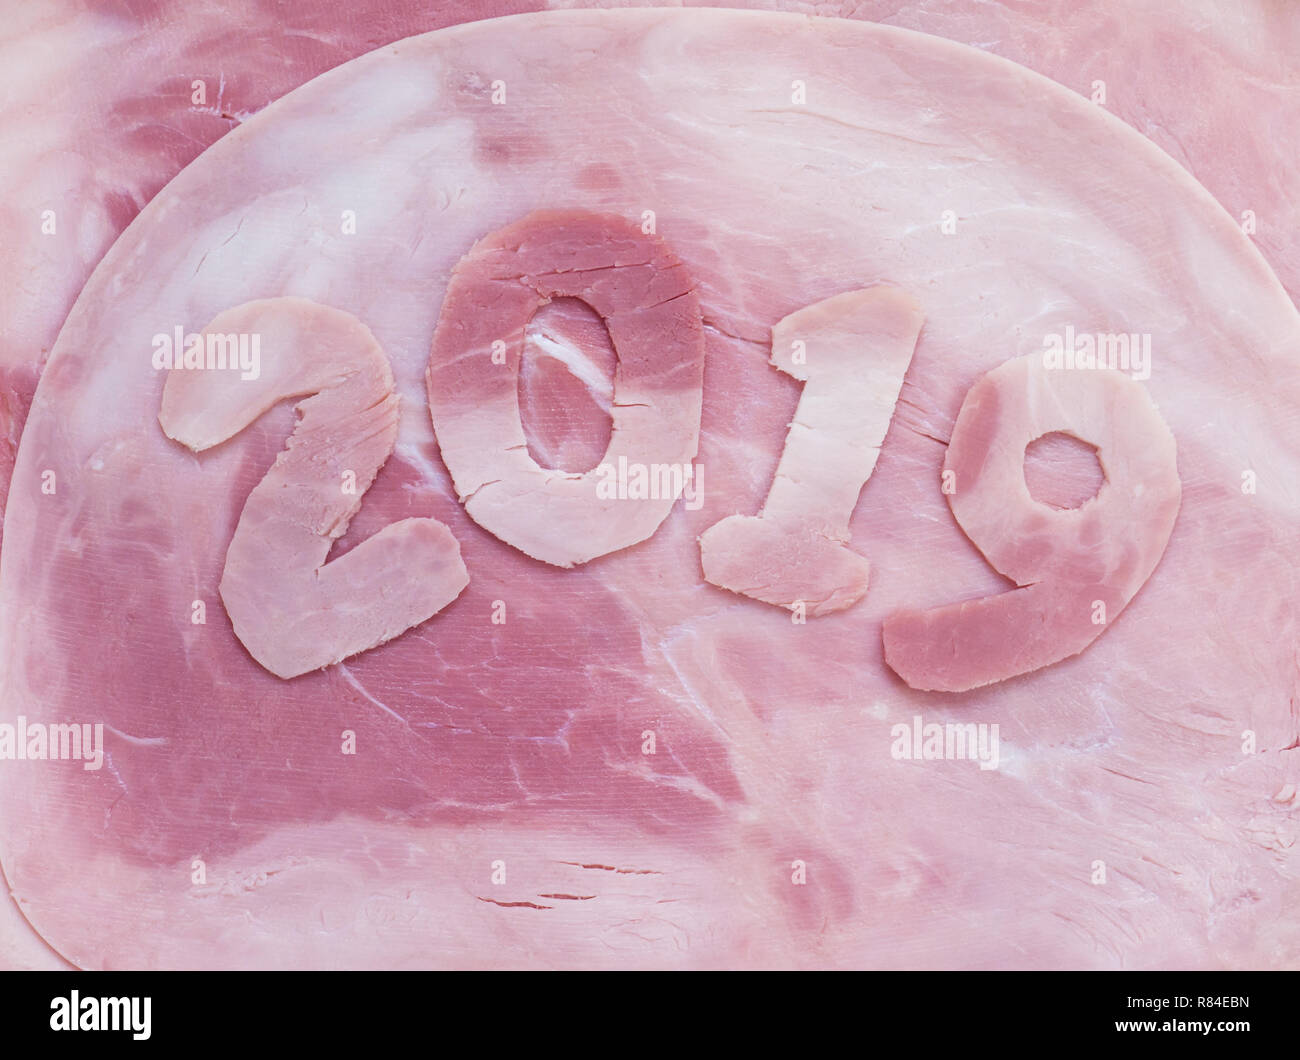 2019 year digits made of the pork ham as a symbol of new year. Animal chinese horoscope. Stock Photo